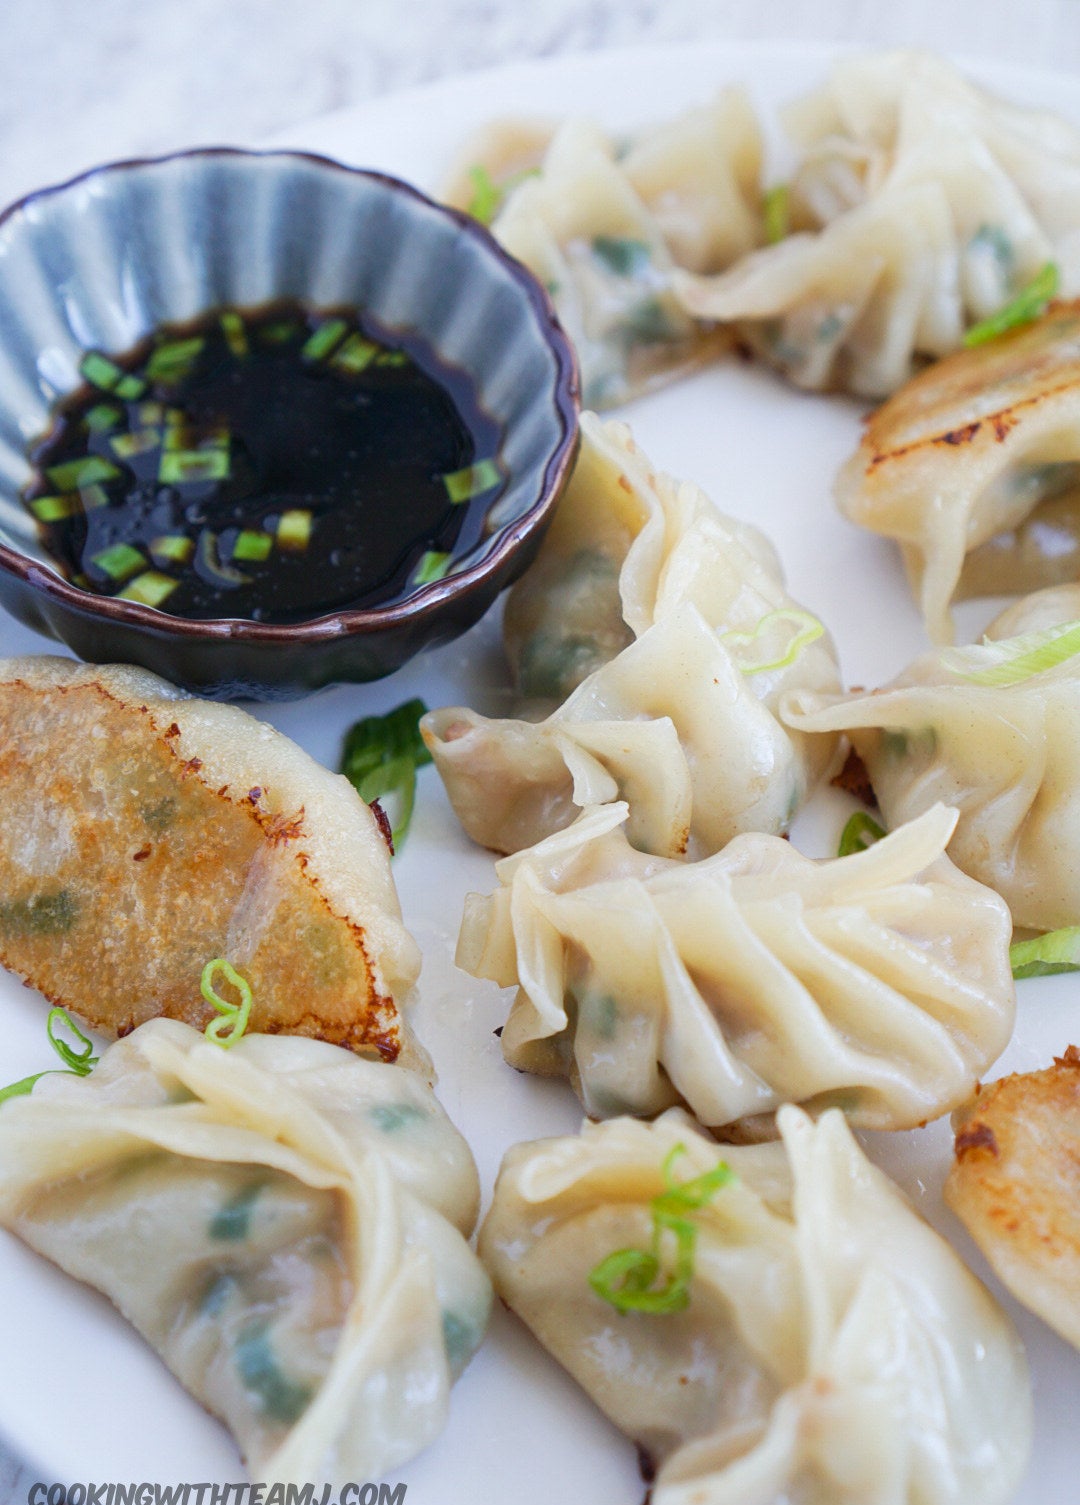 Pork and chive steamed dumplings with soy sauce on the side.